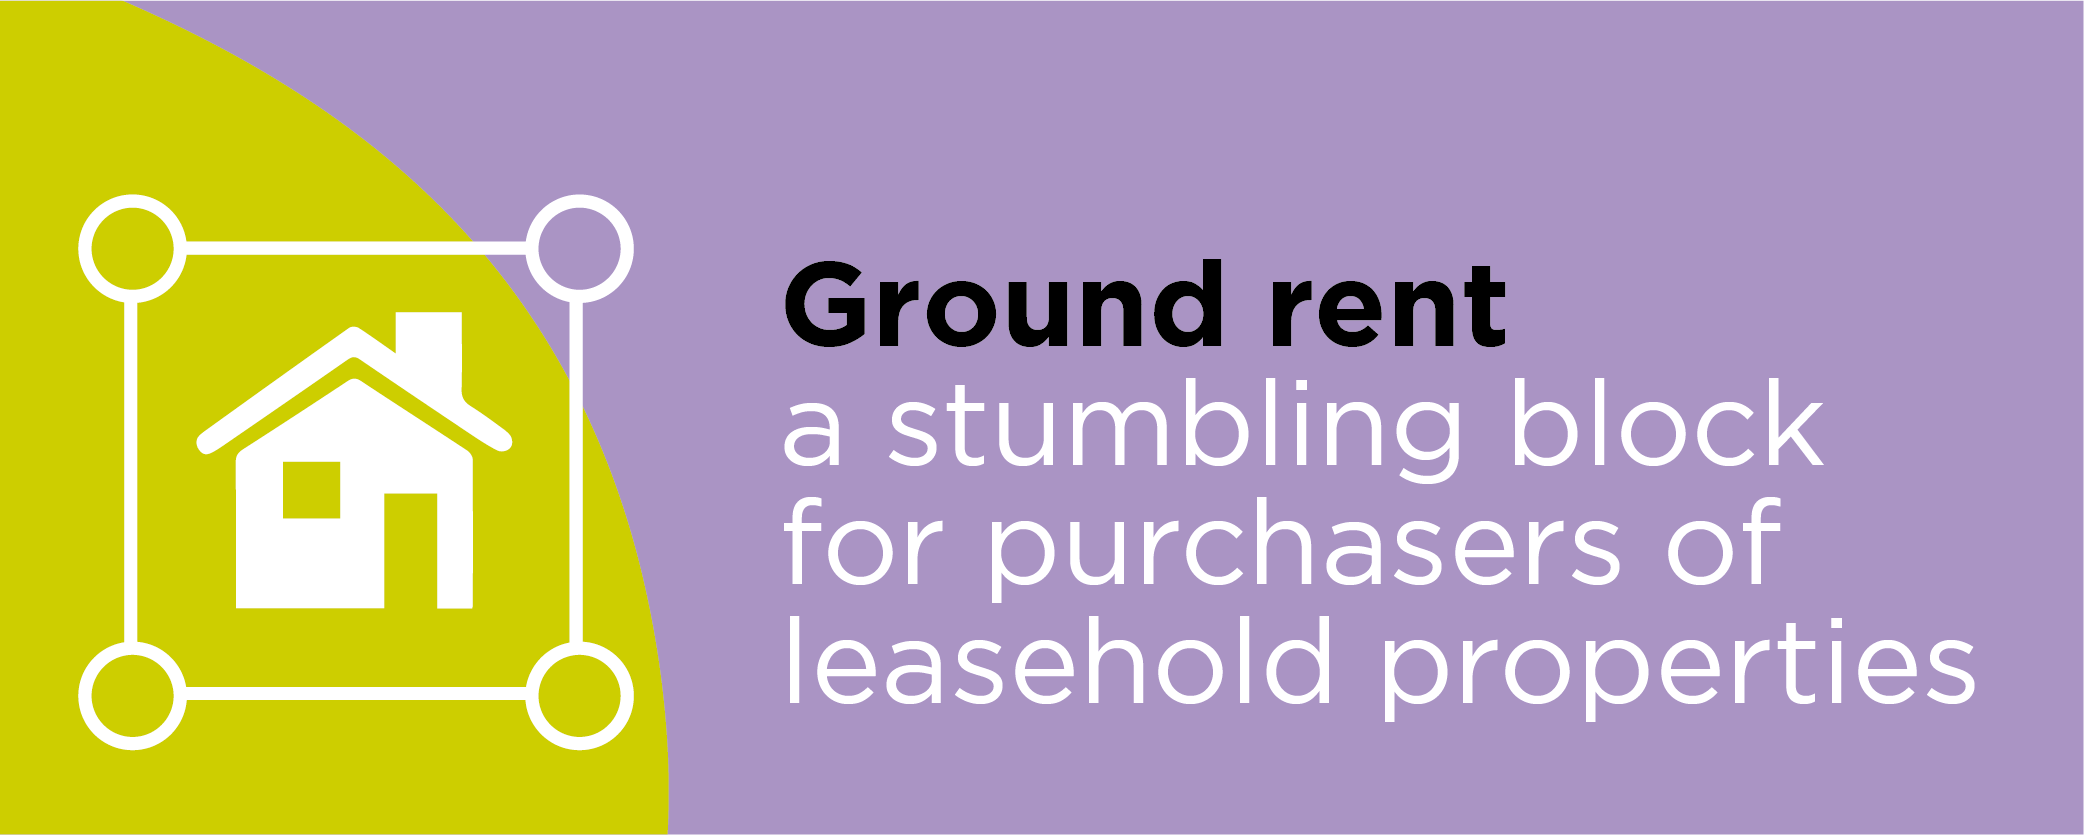 Ground rent - a stumbling block for purchasers of leasehold properties